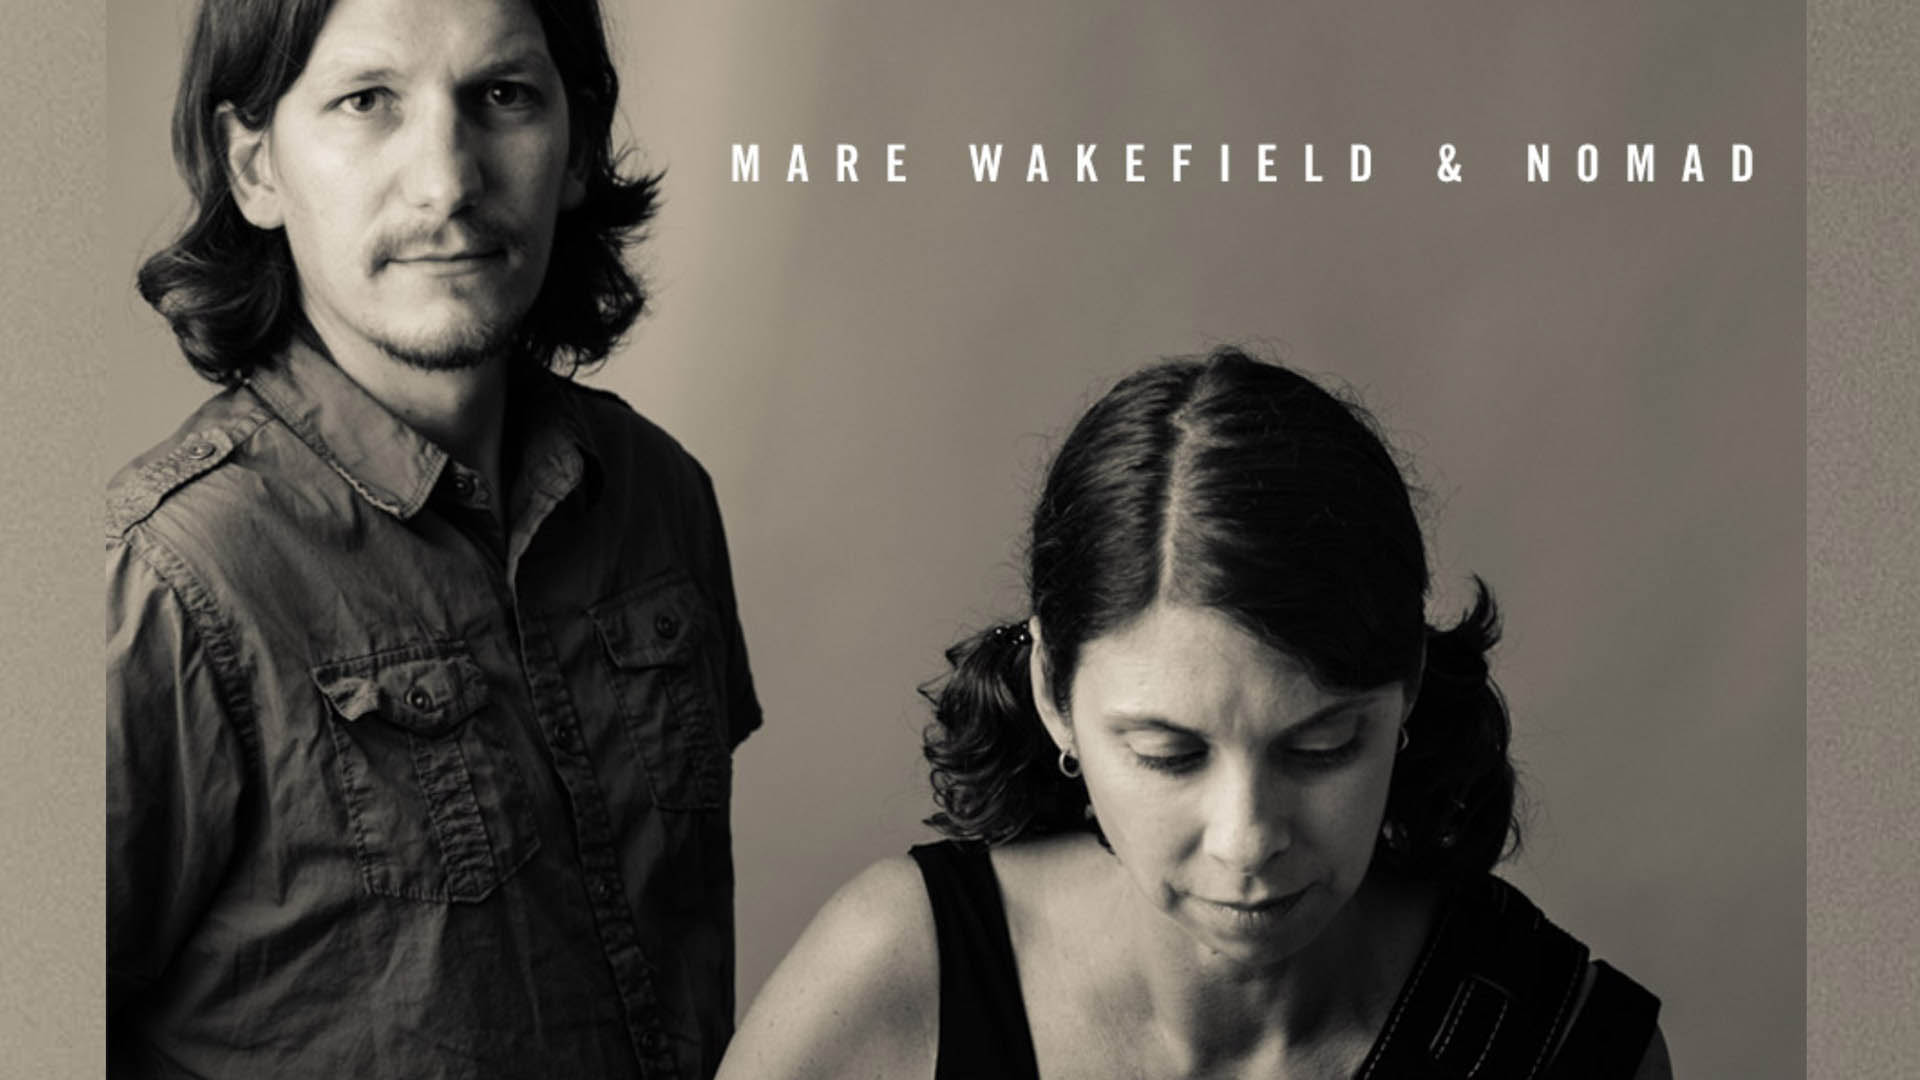 Mare Wakefield and Nomad